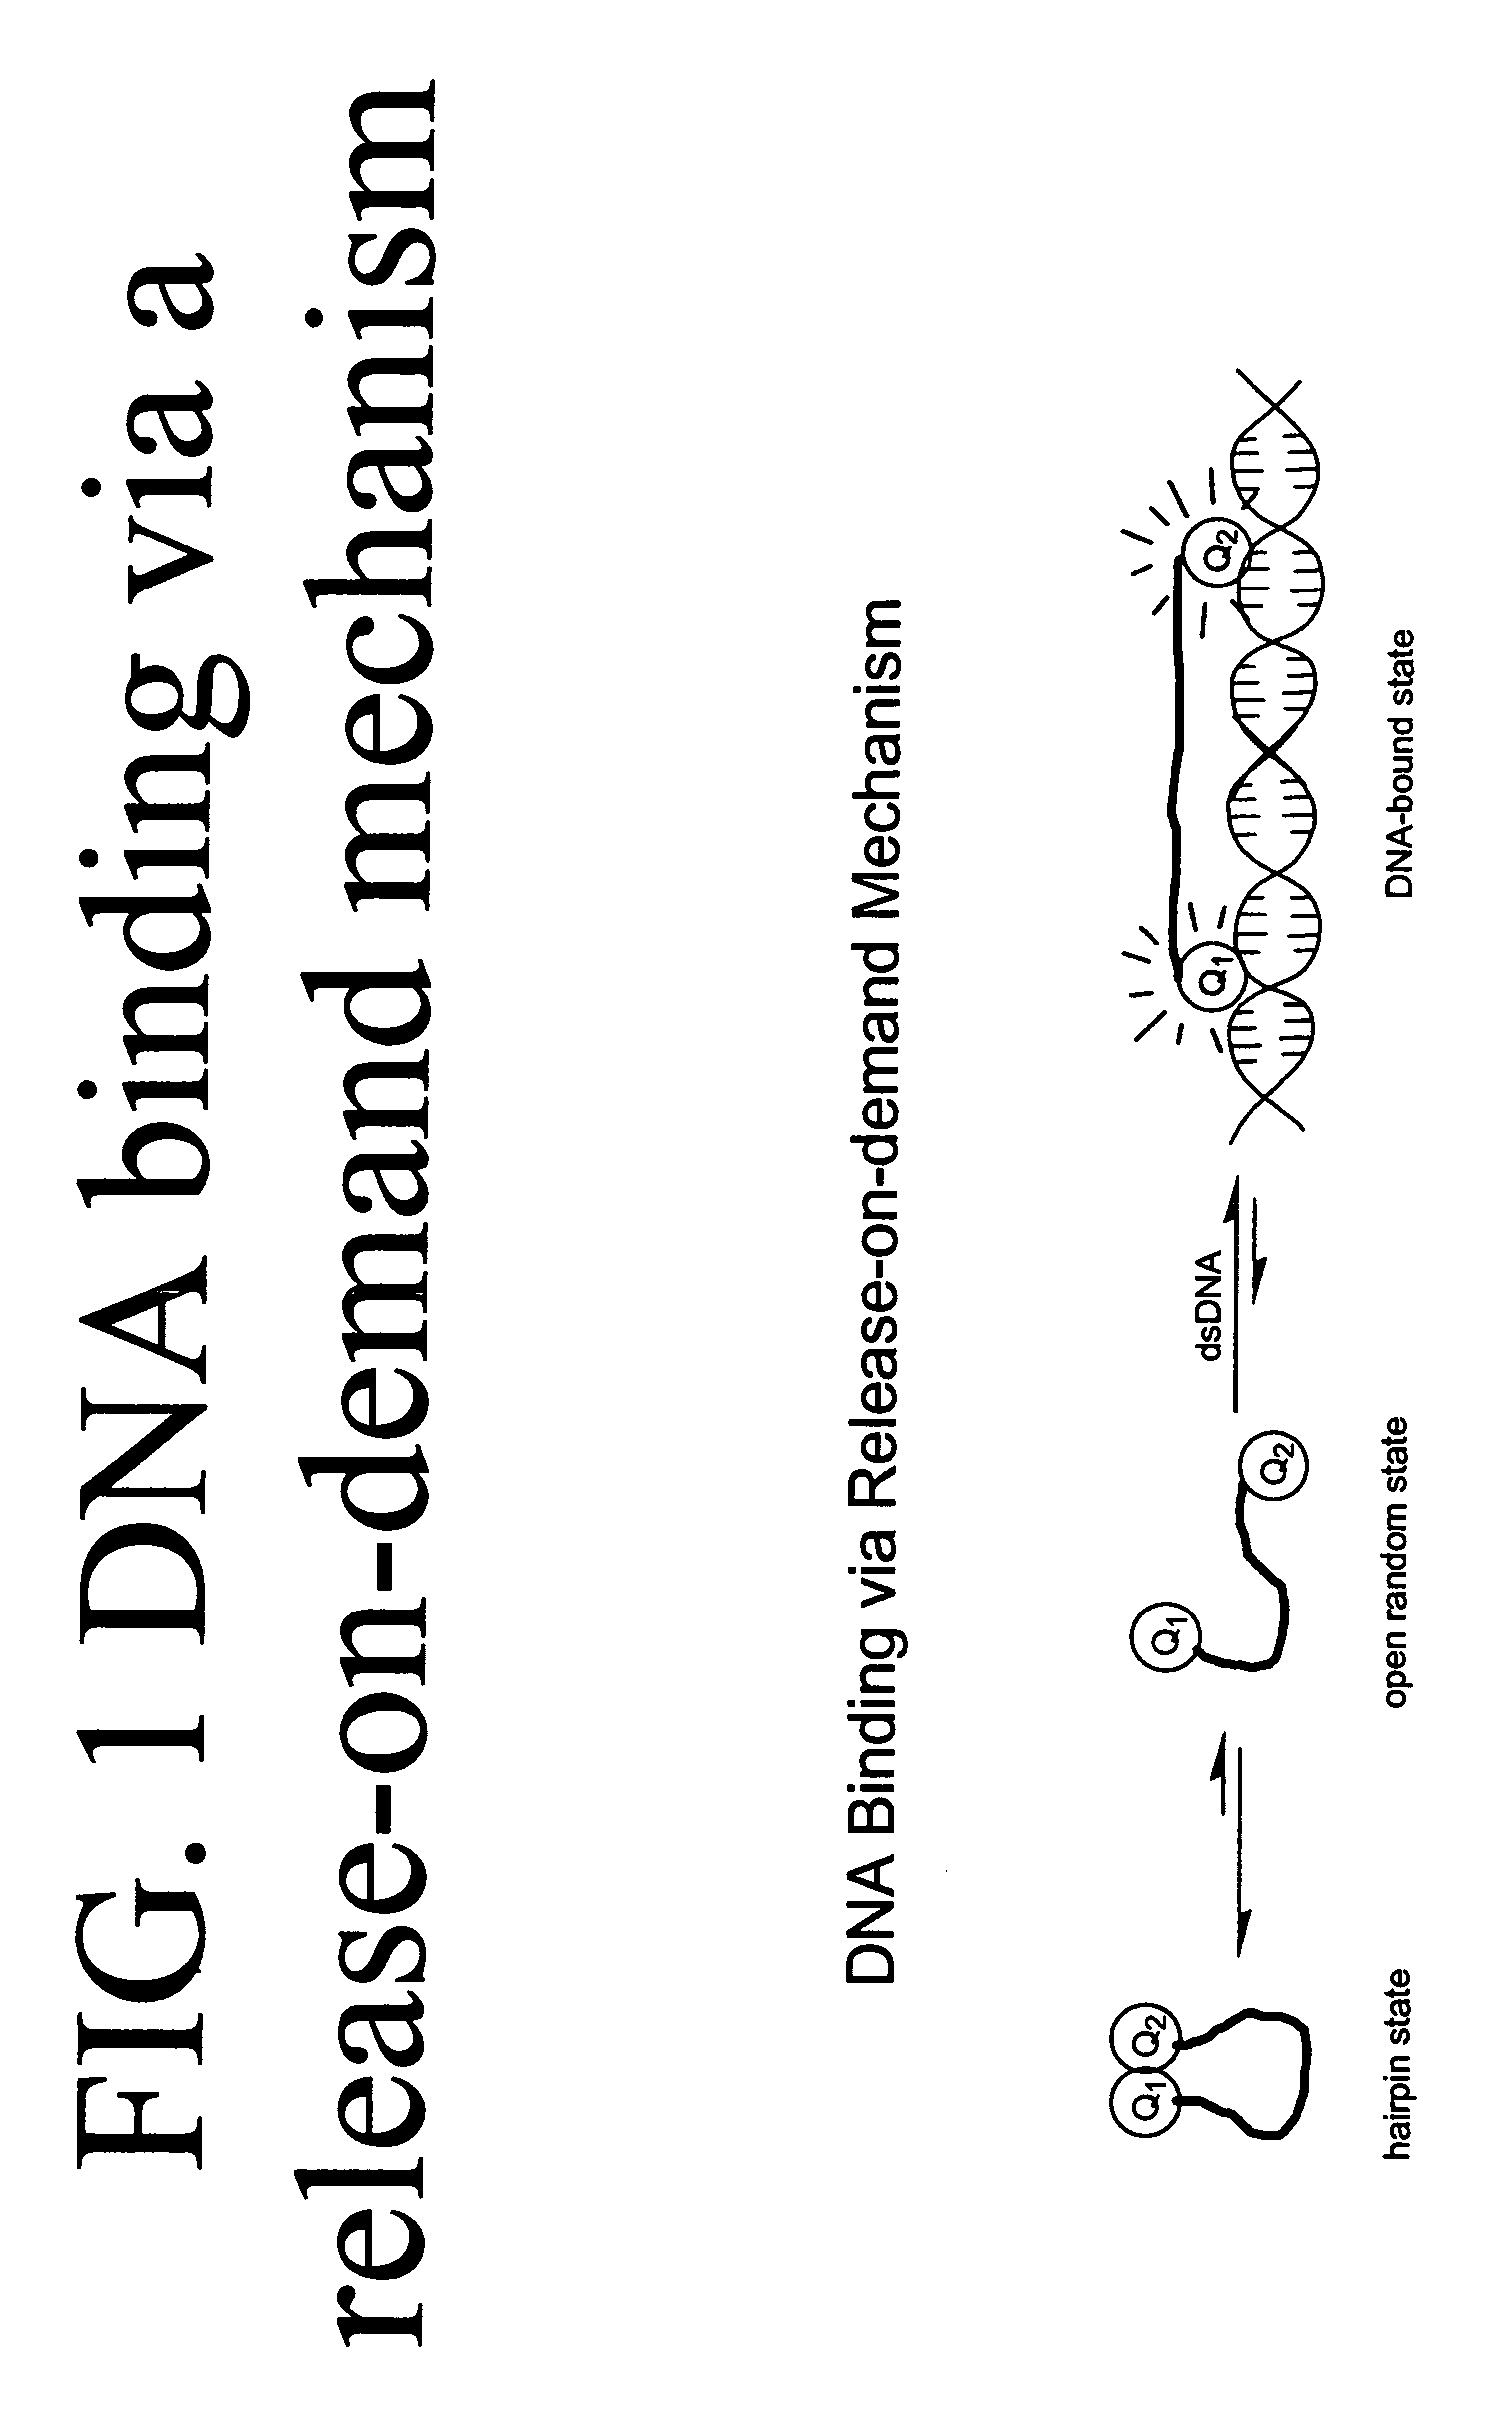 Methods of using dyes in association with nucleic acid staining or detection and associated technology